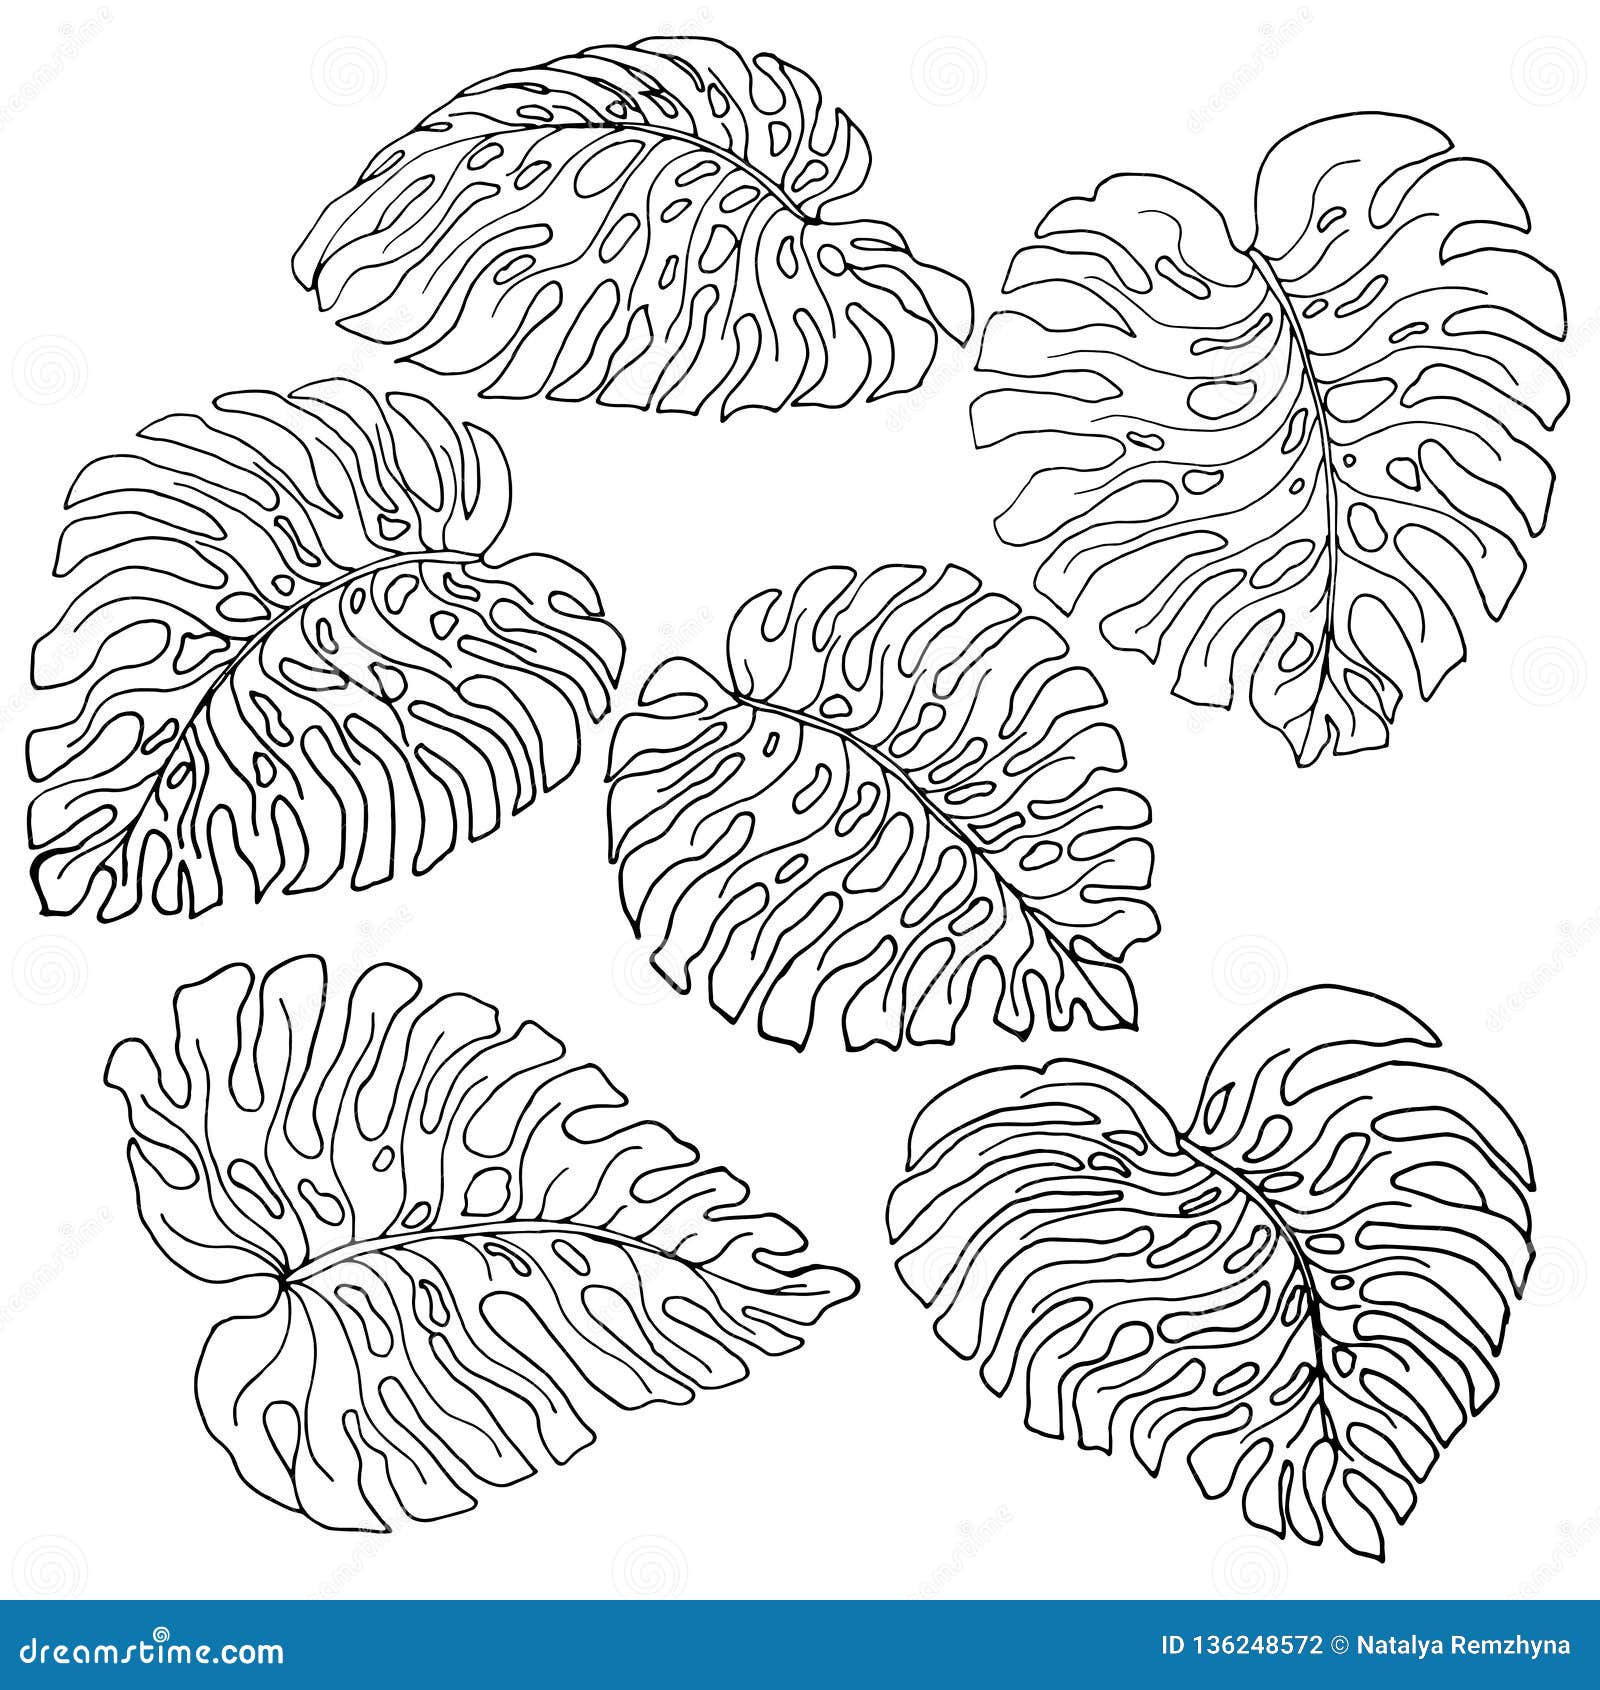 A Set Of Exotic, White Monstera Leaves With A Black Outlines, Isolated